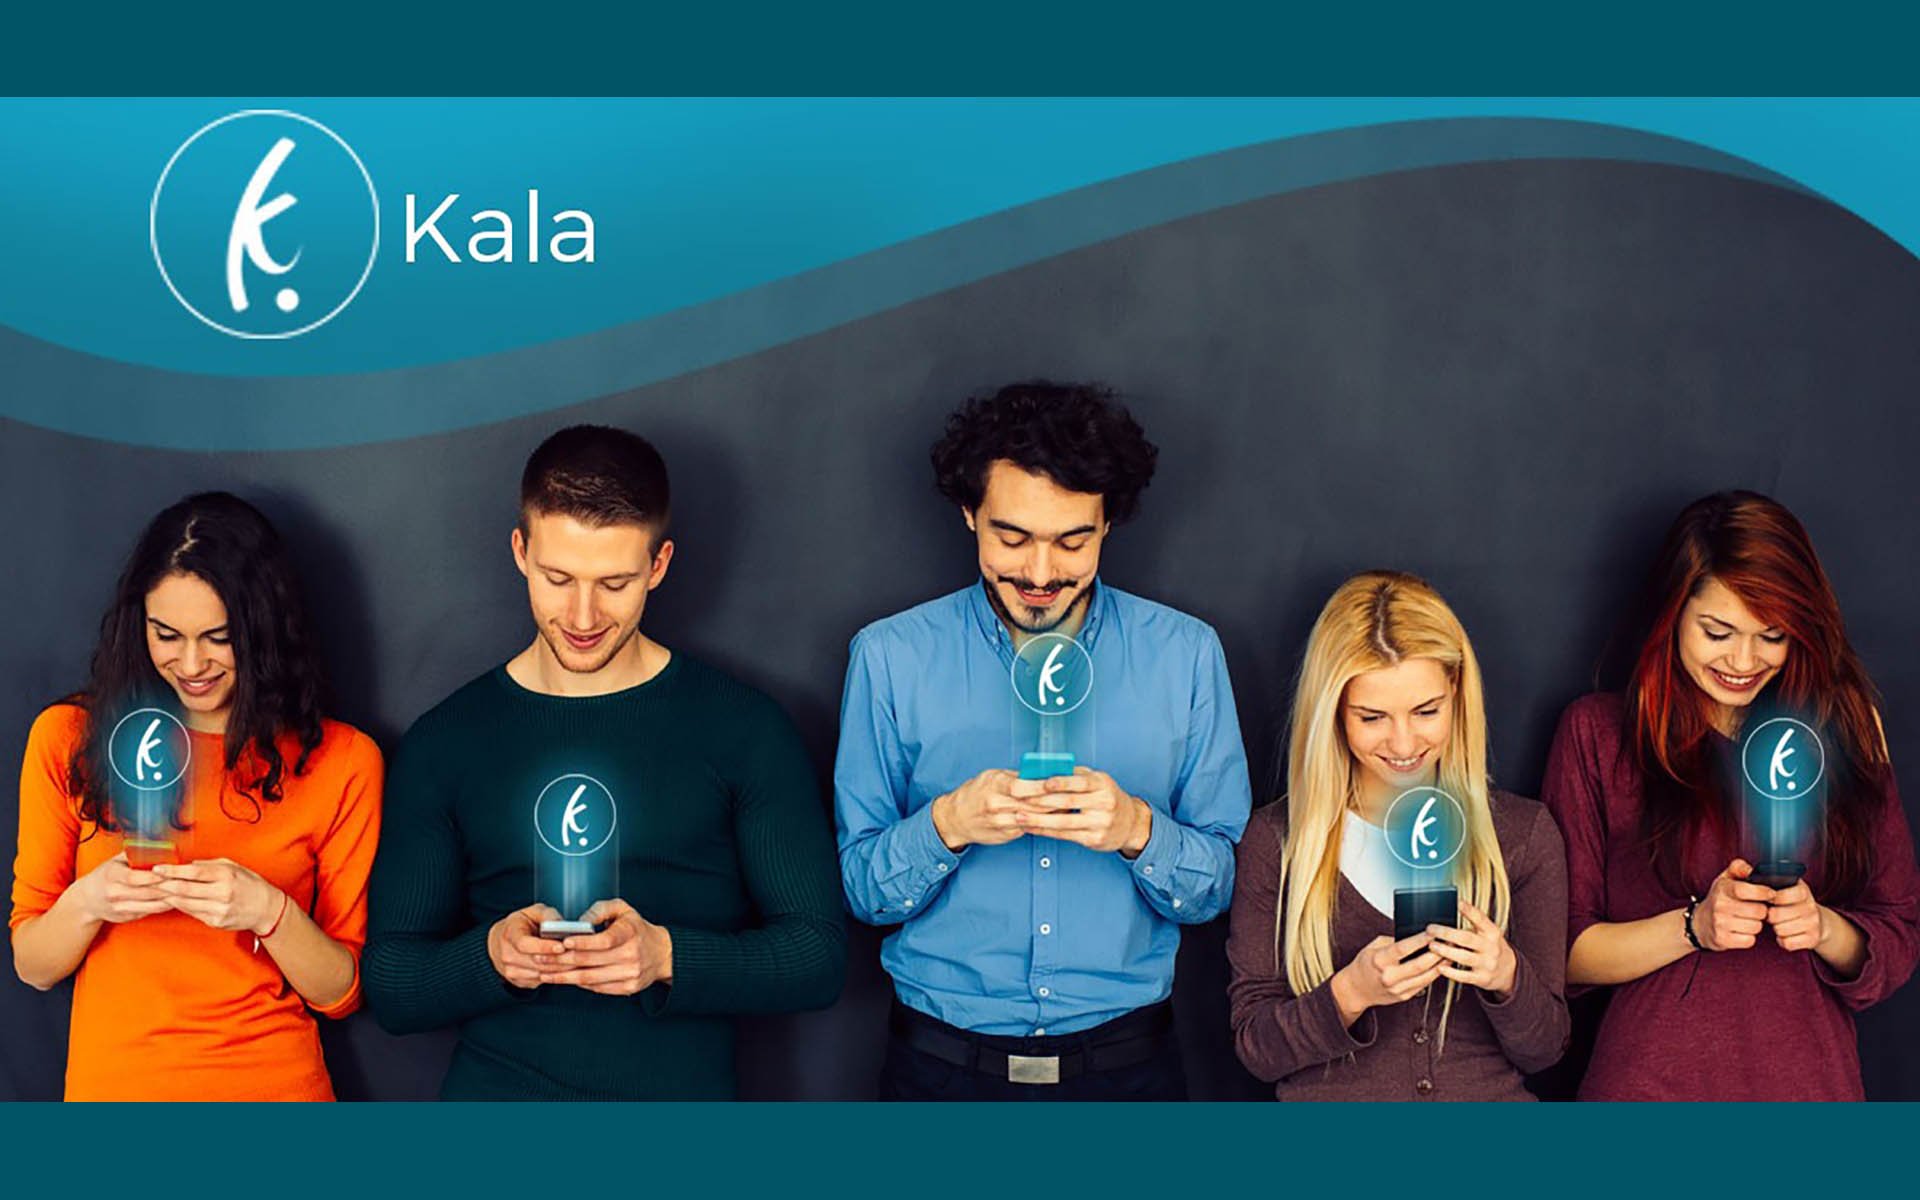 Kala: The New Cryptocurrency With Immediate Inherent Value